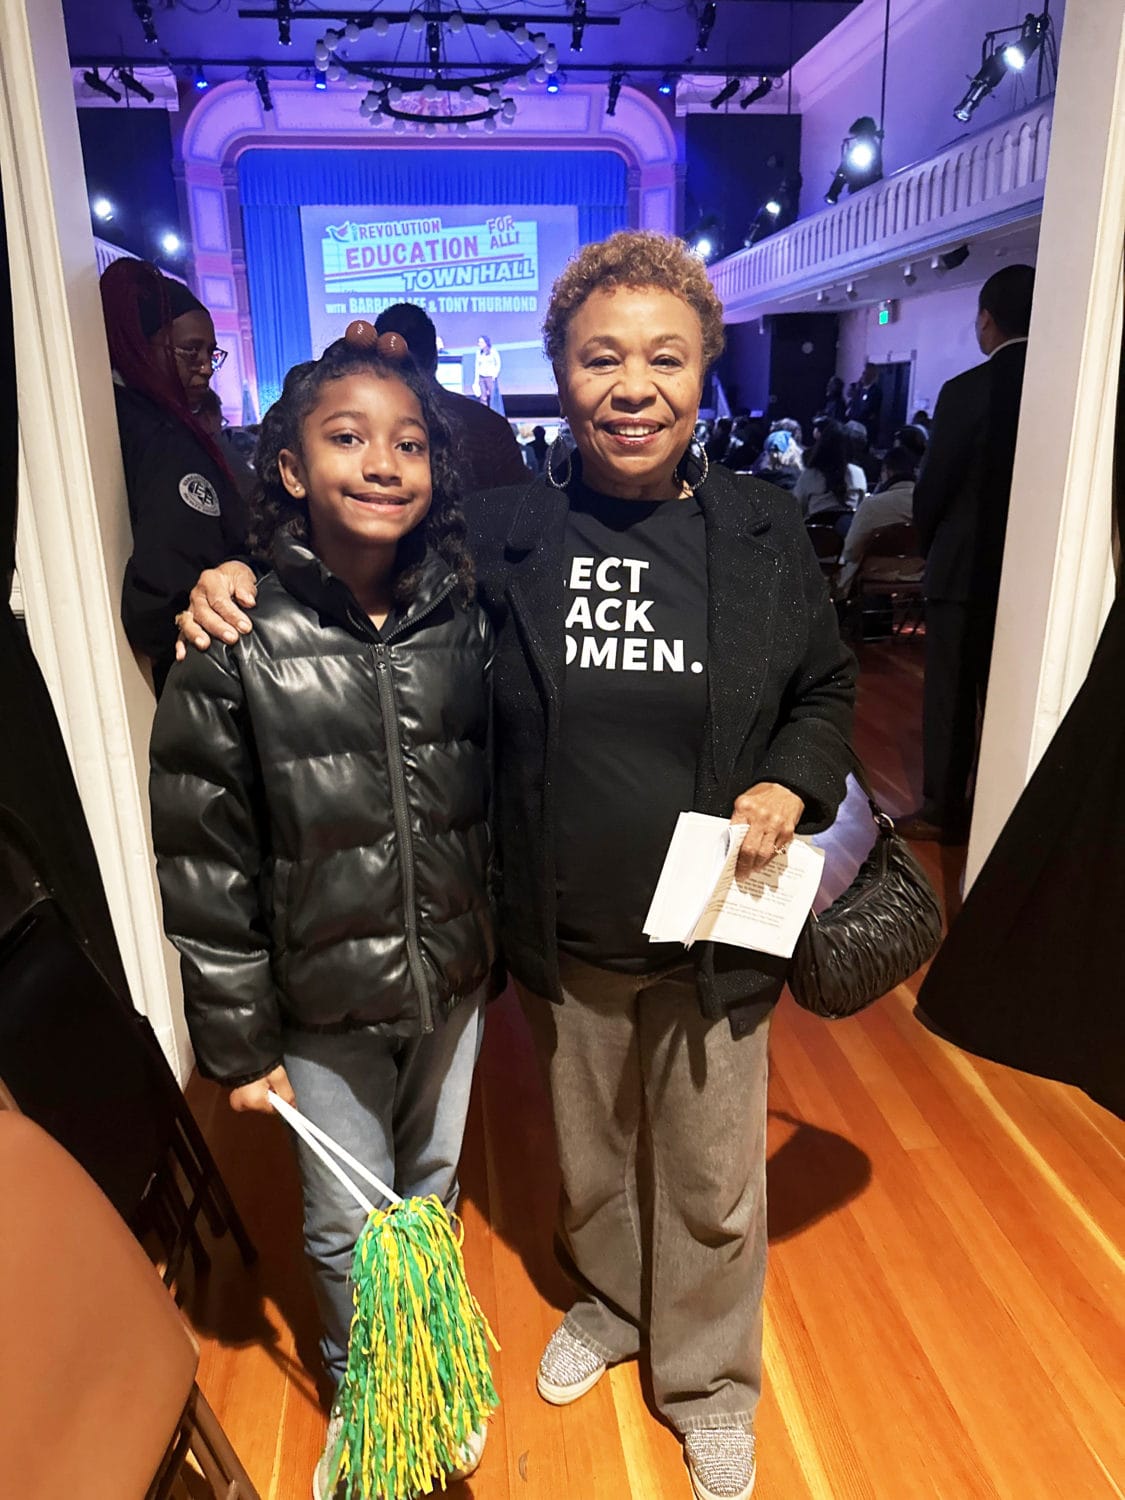 Kamia-Epps-Barbara-Lee-at-Ruth-Williams-Opera-House-011524-by-Kevin-Epps-1, Barbara Lee: My fight for democracy, Local News & Views World News & Views 